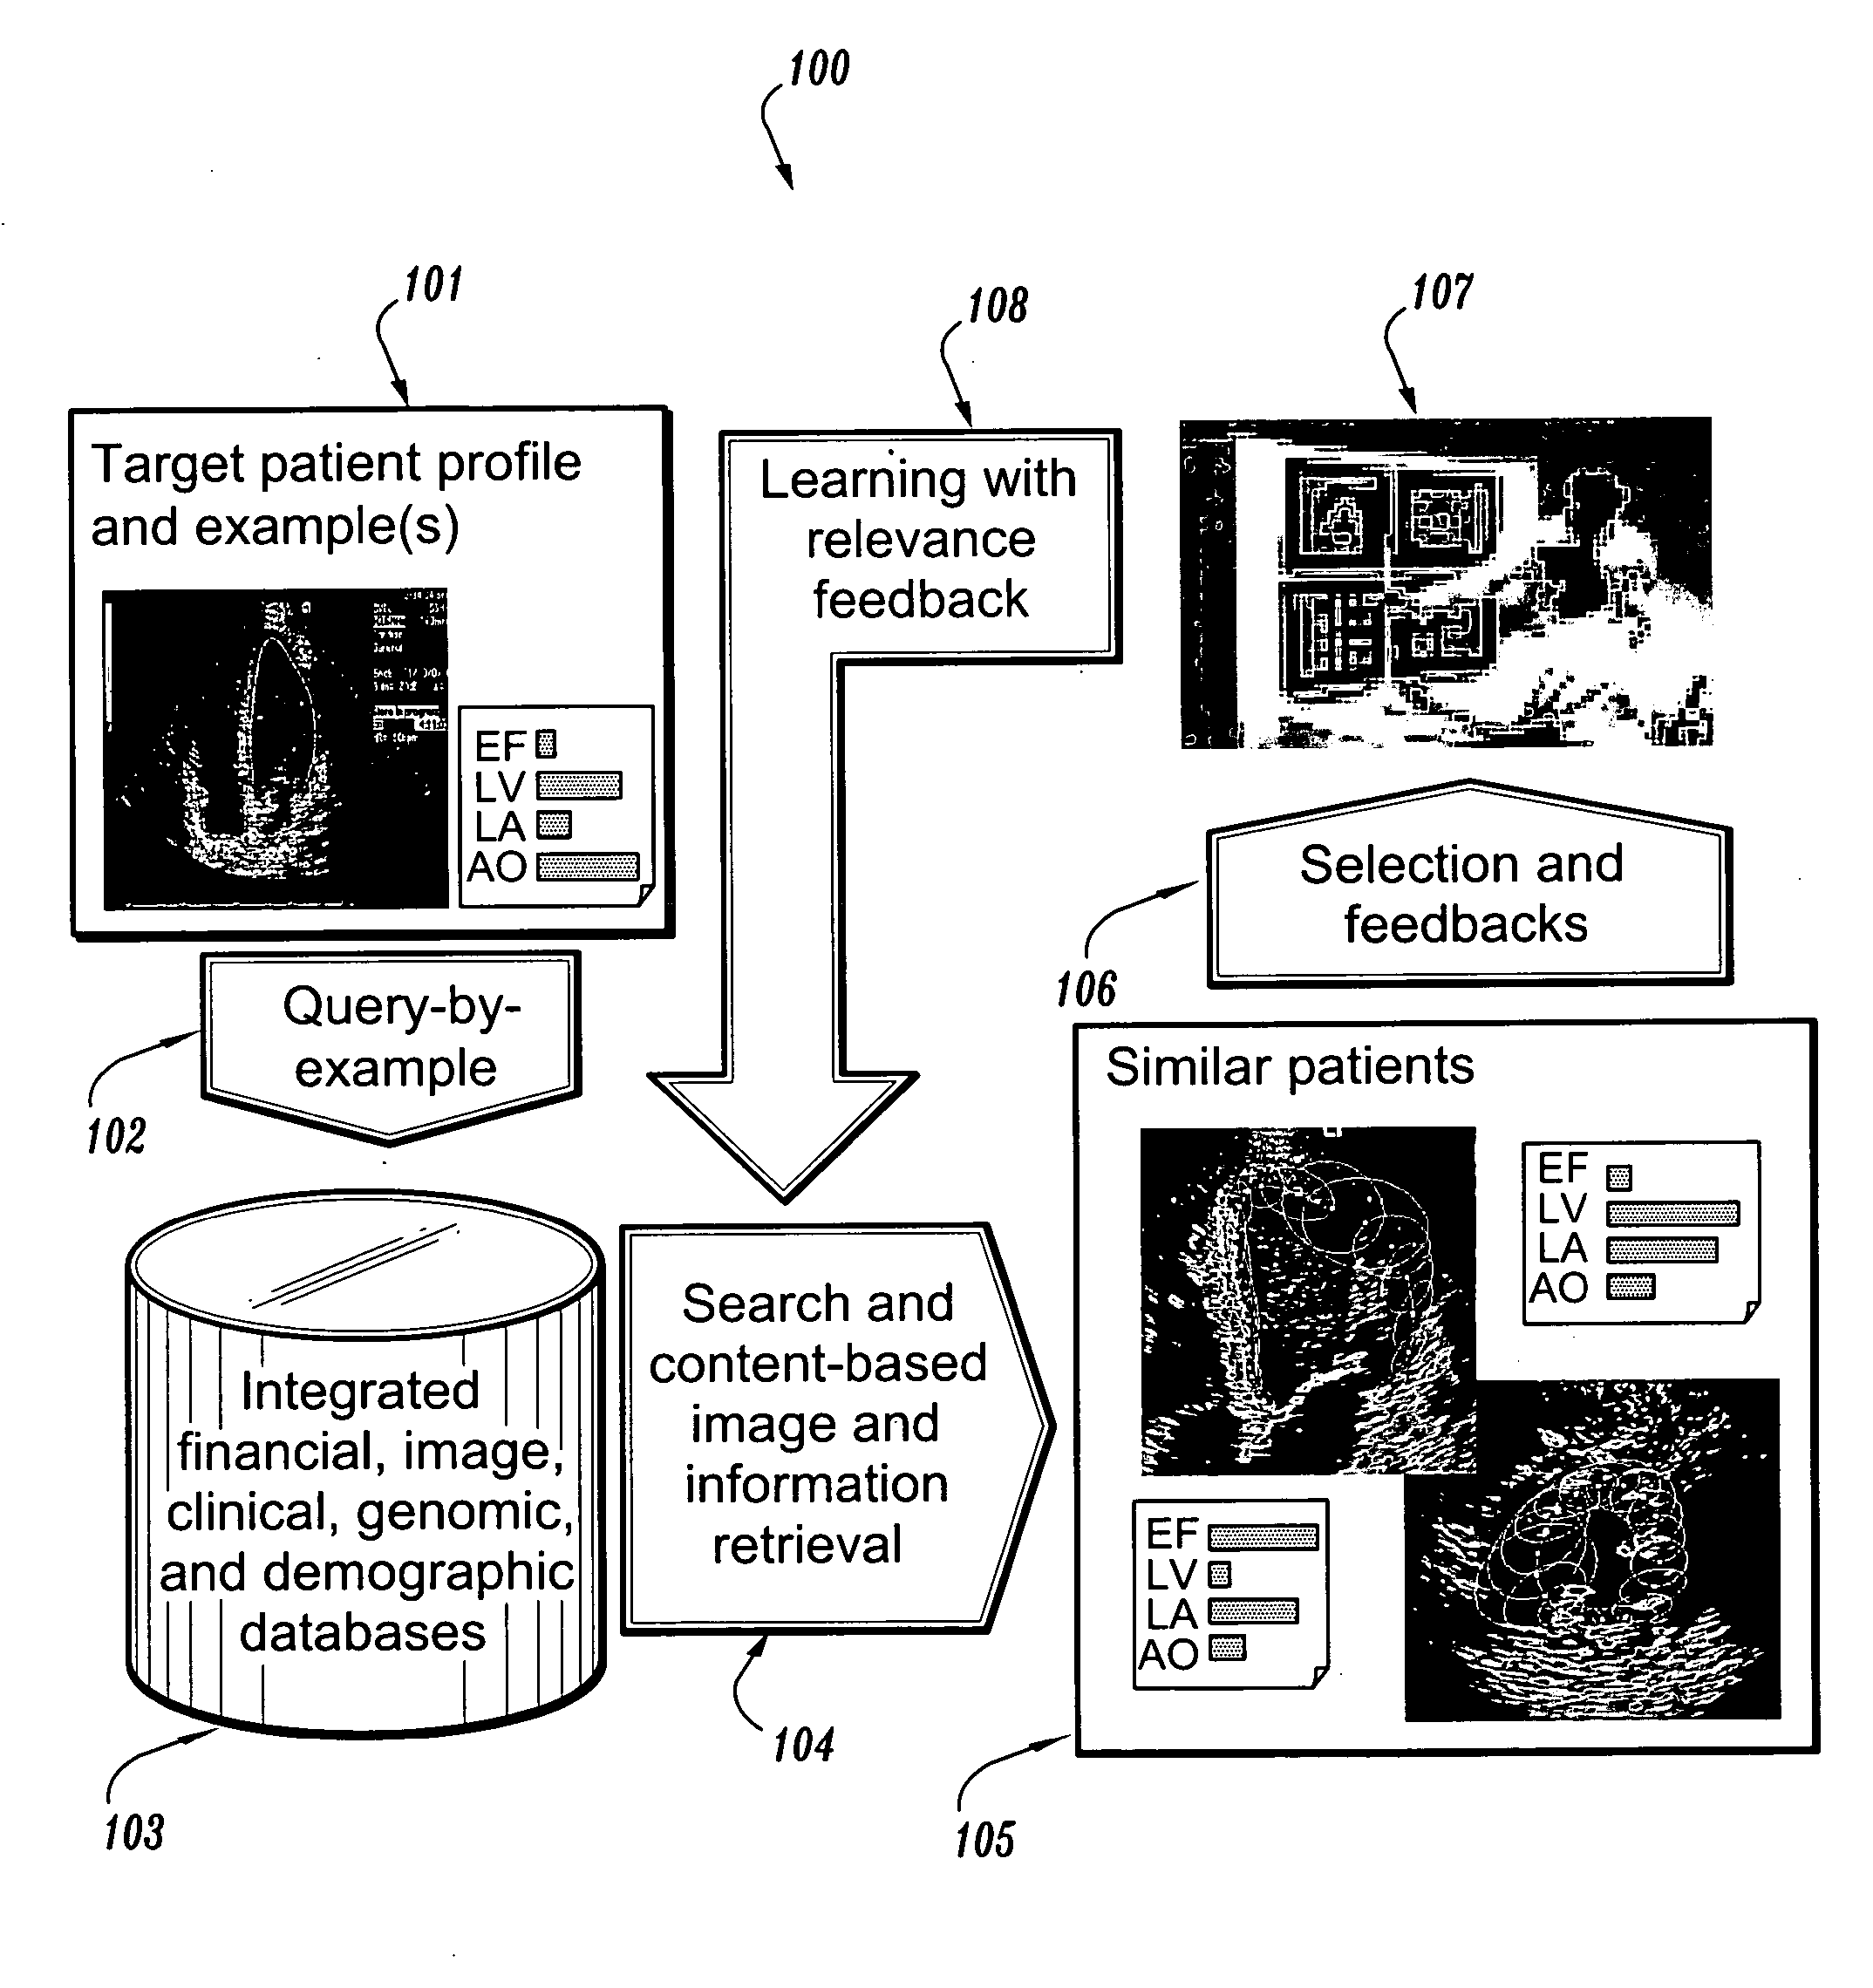 System and method for patient identification for clinical trials using content-based retrieval and learning